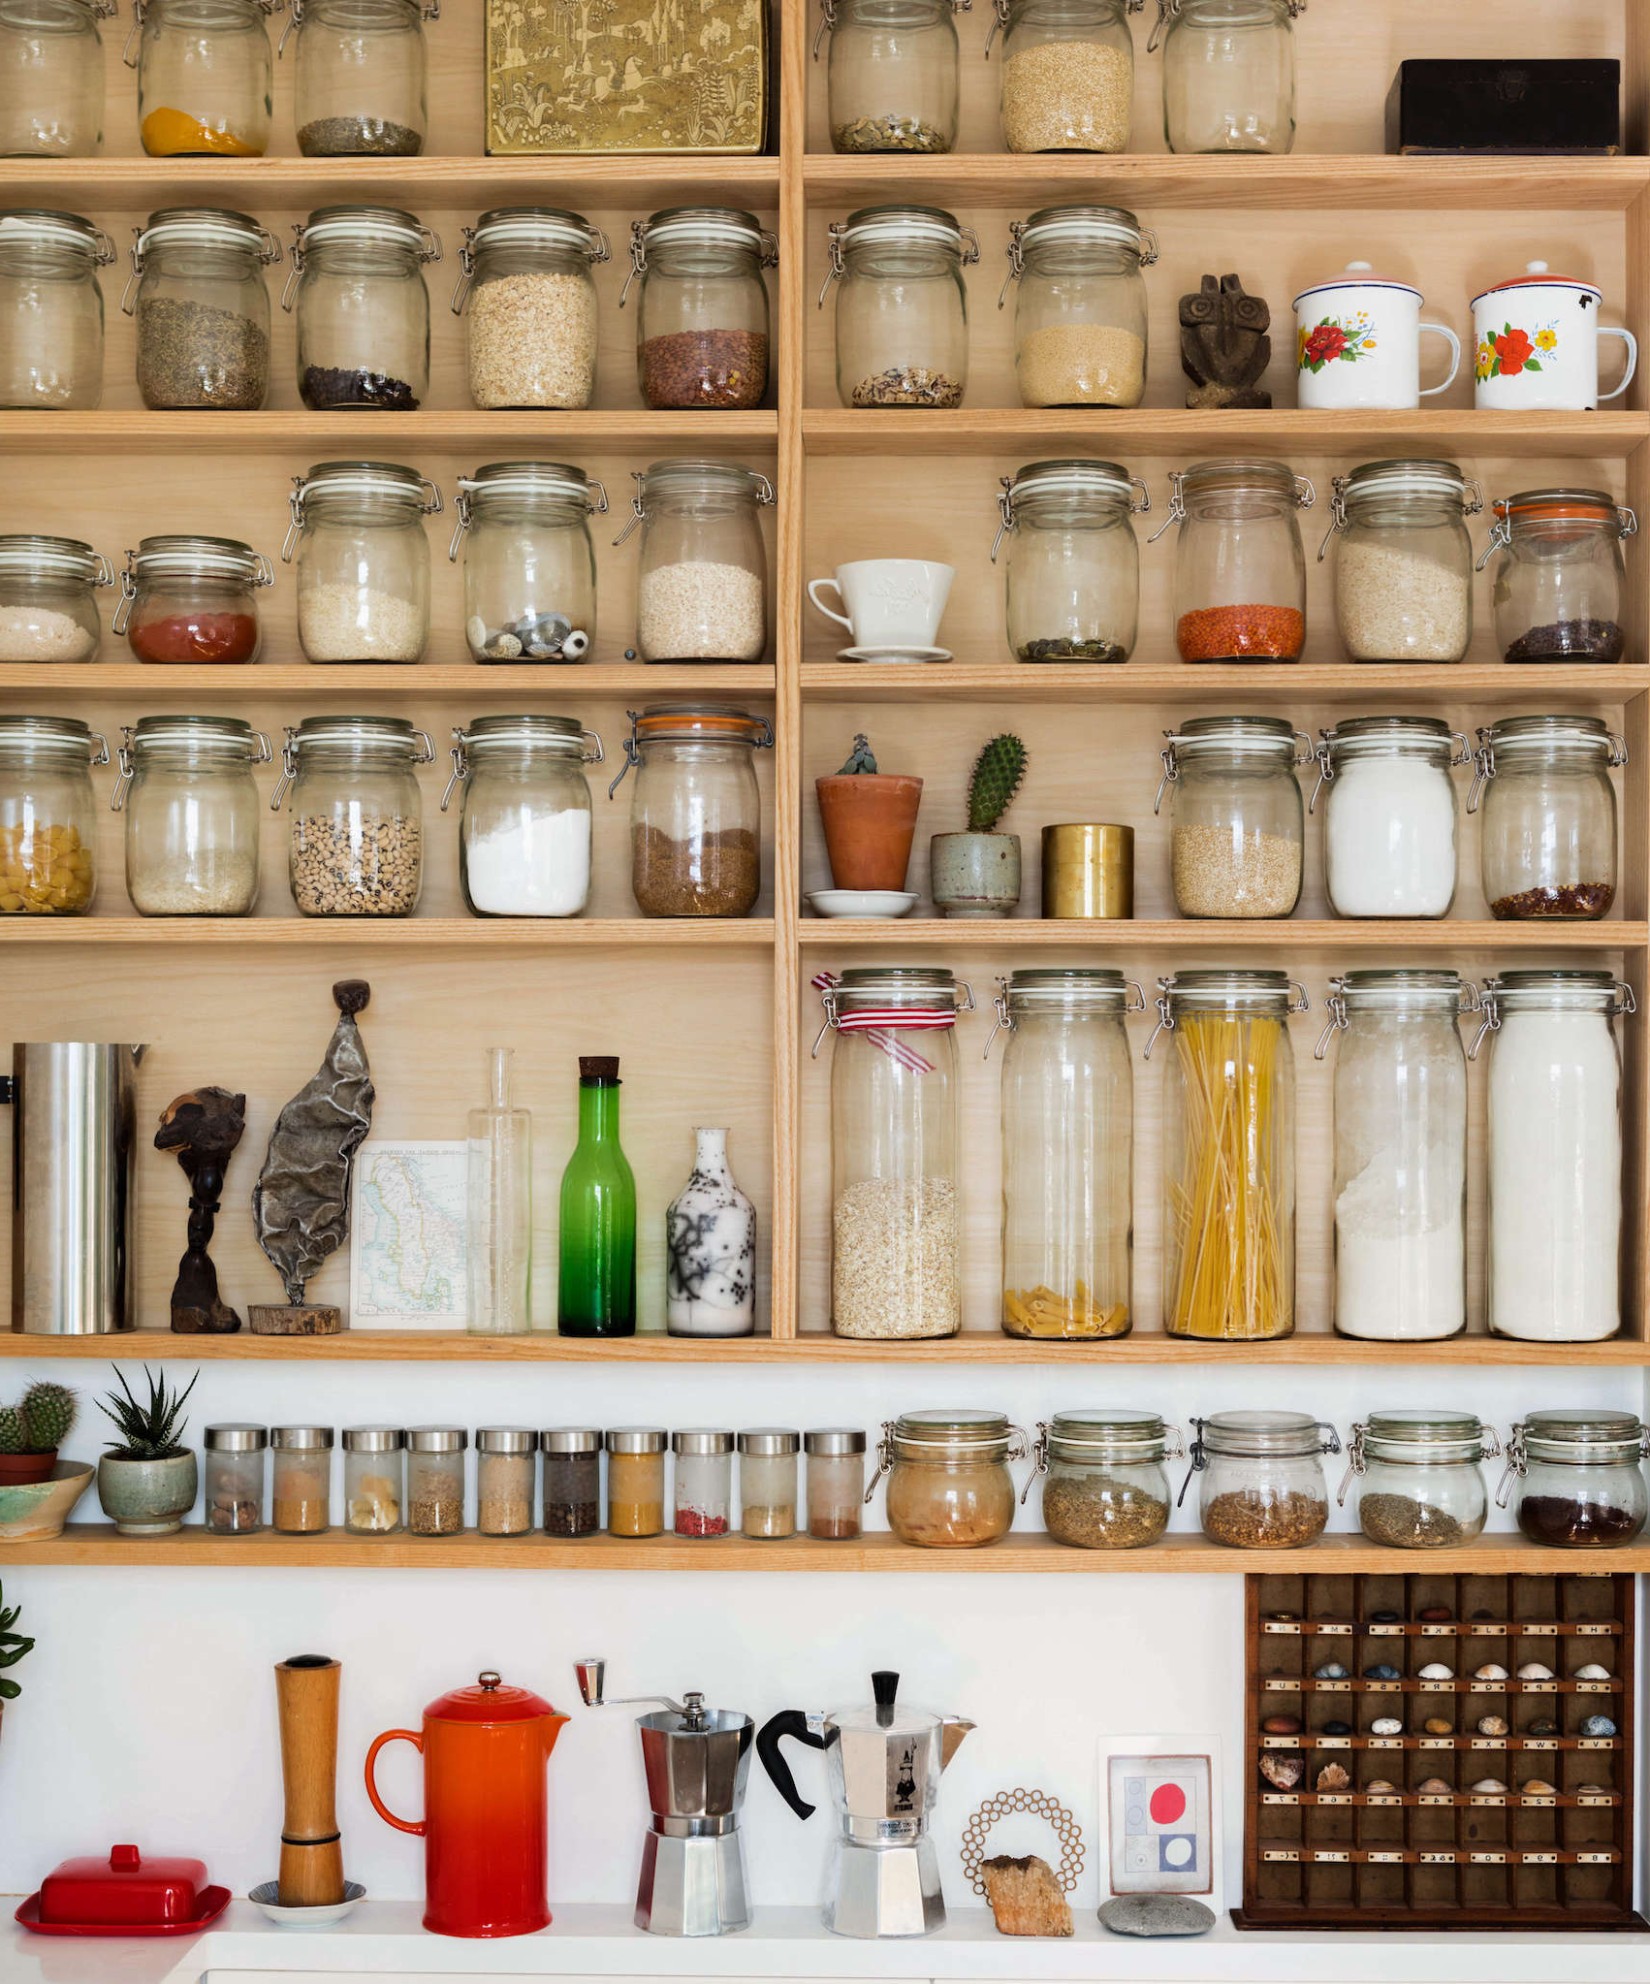 4 Tips for Maximizing Storage in a Tiny Kitchen - how do you maximize storage in a small kitchen?